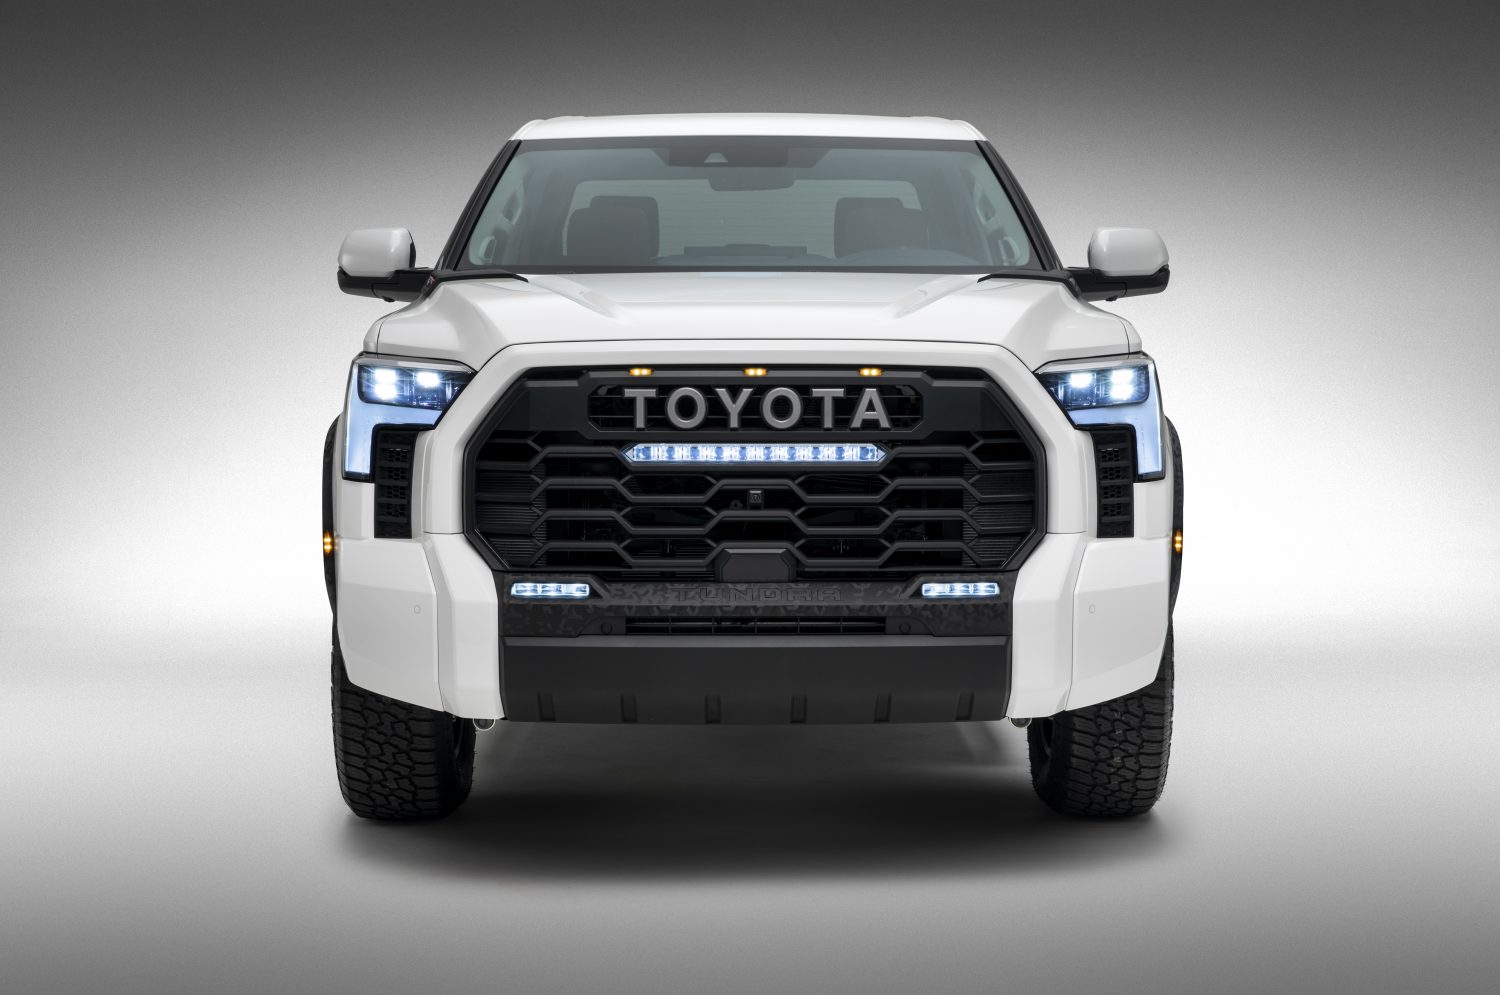 Promo photo of a Toyota Tundra TRD Pro hybrid pickup truck in white, against a white background.